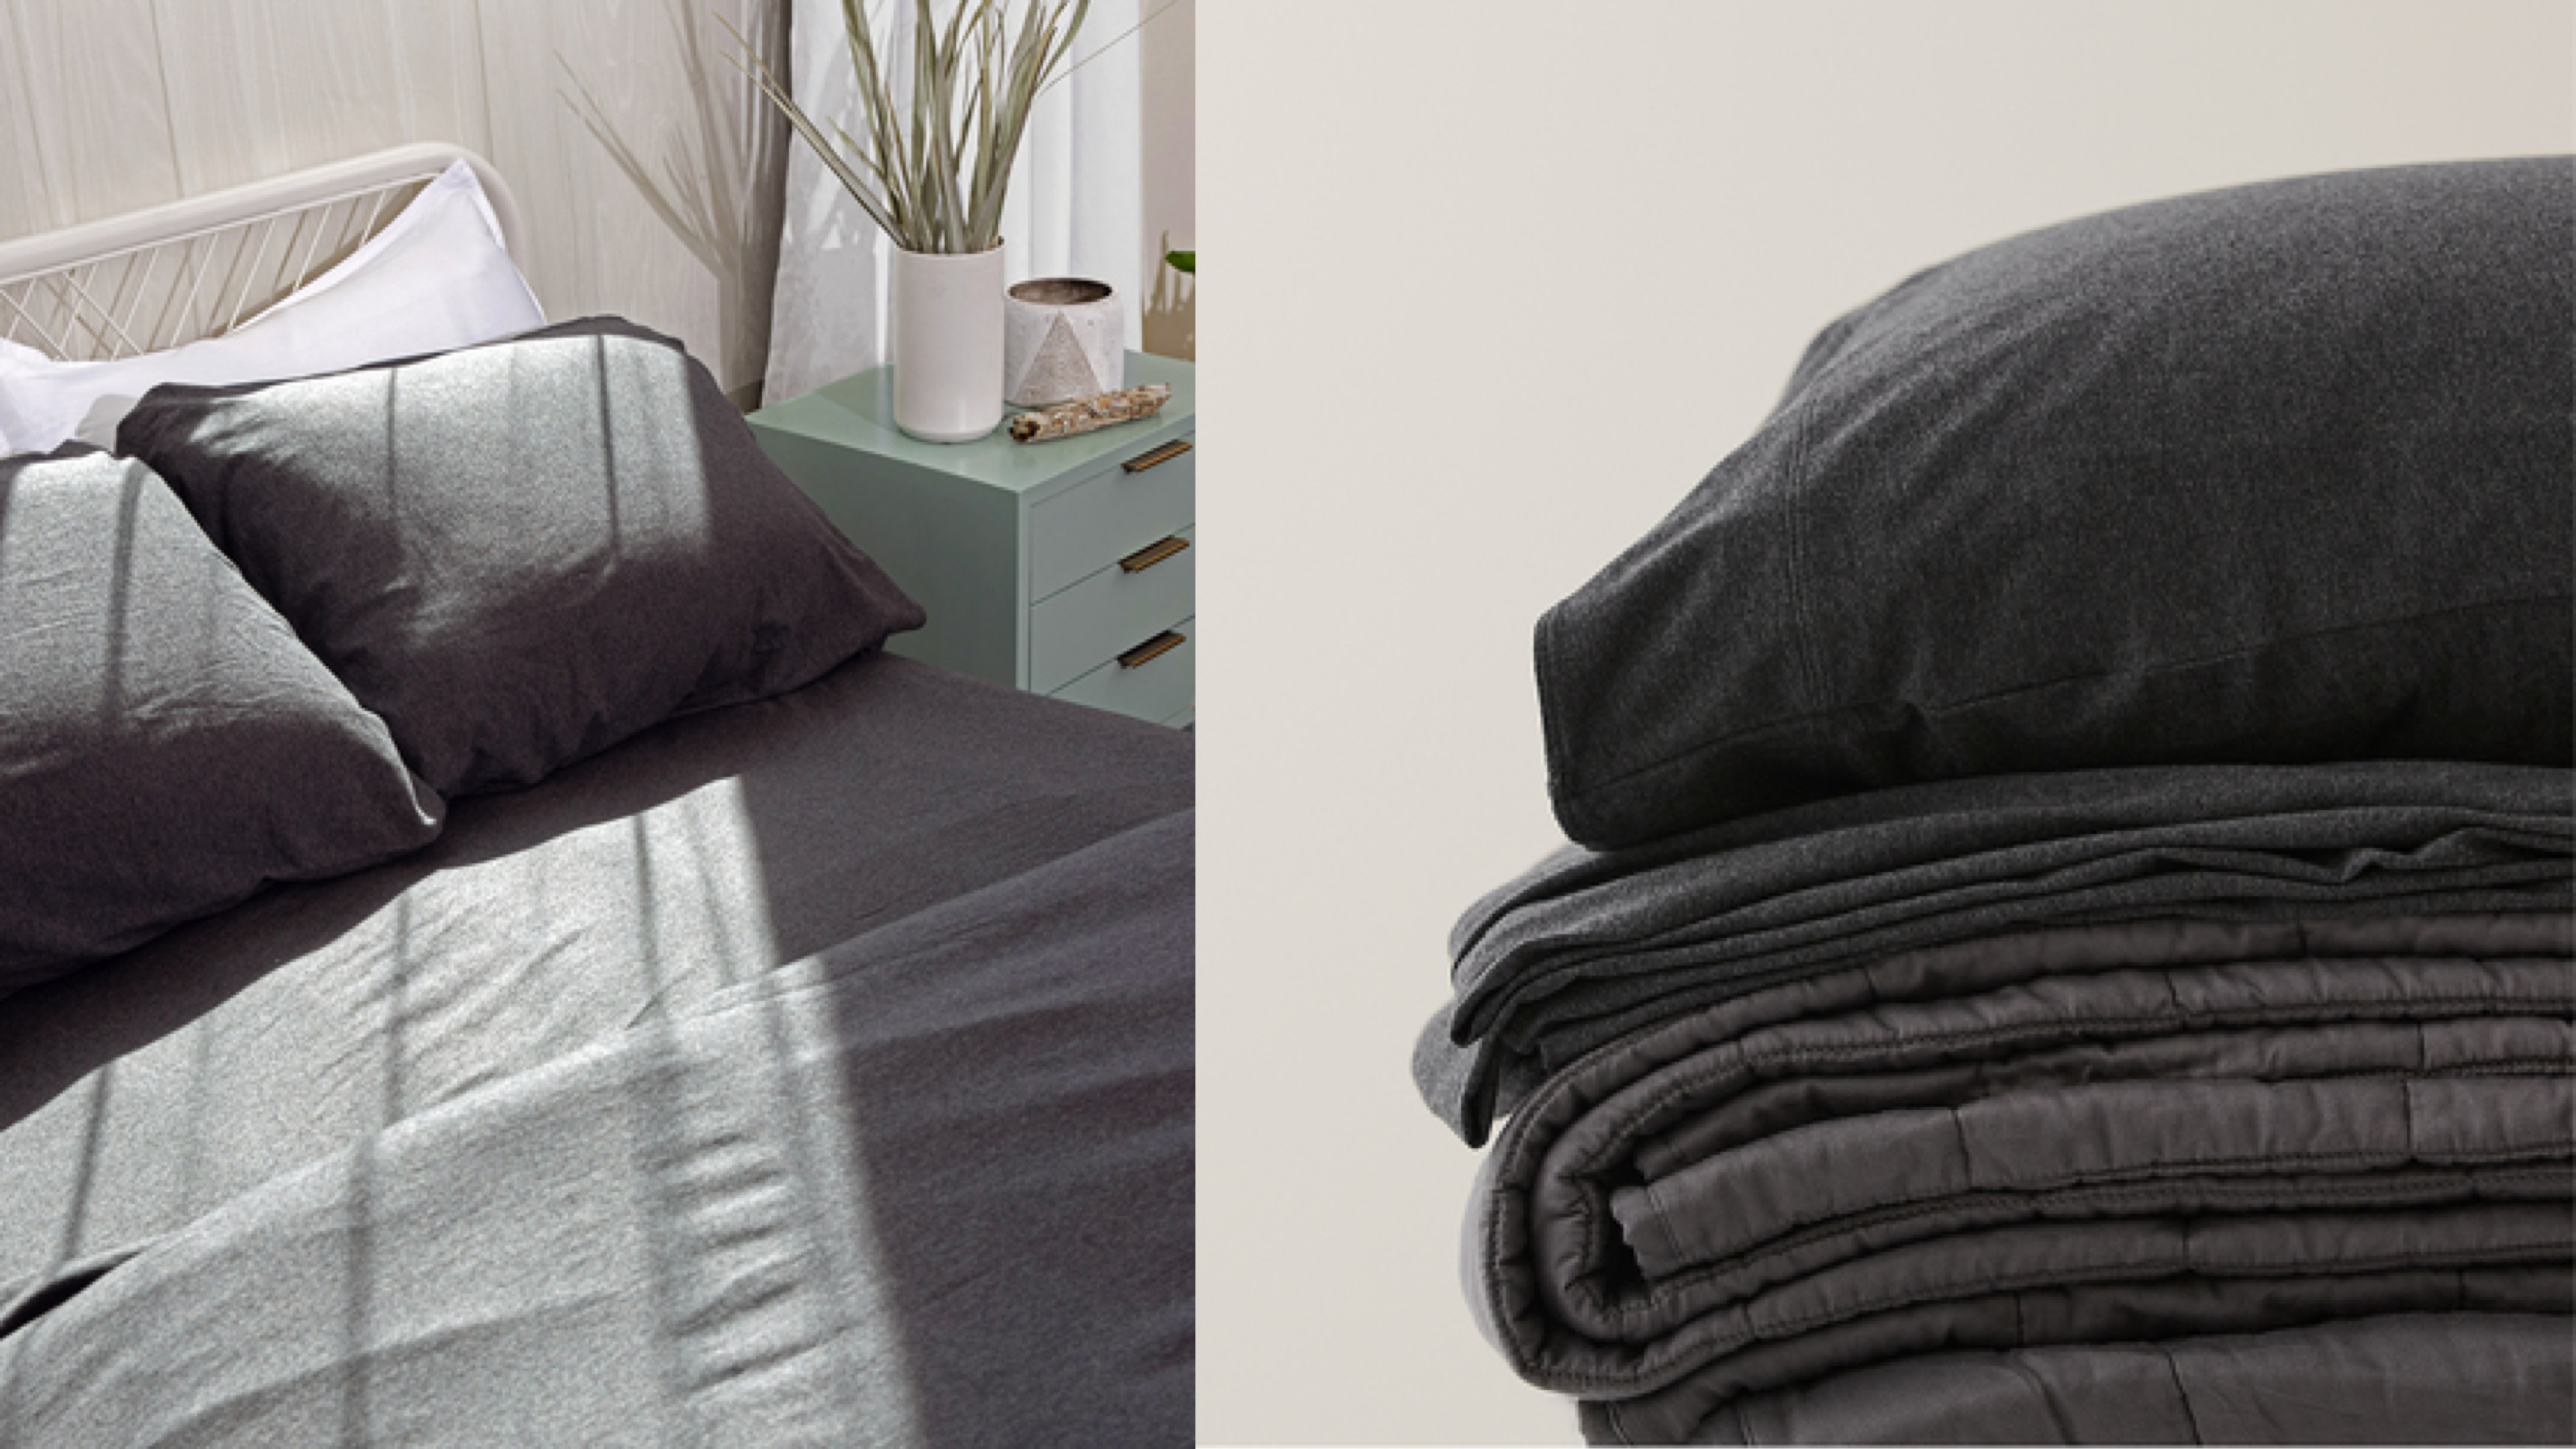 jersey knit sheets that are super soft and comfortable